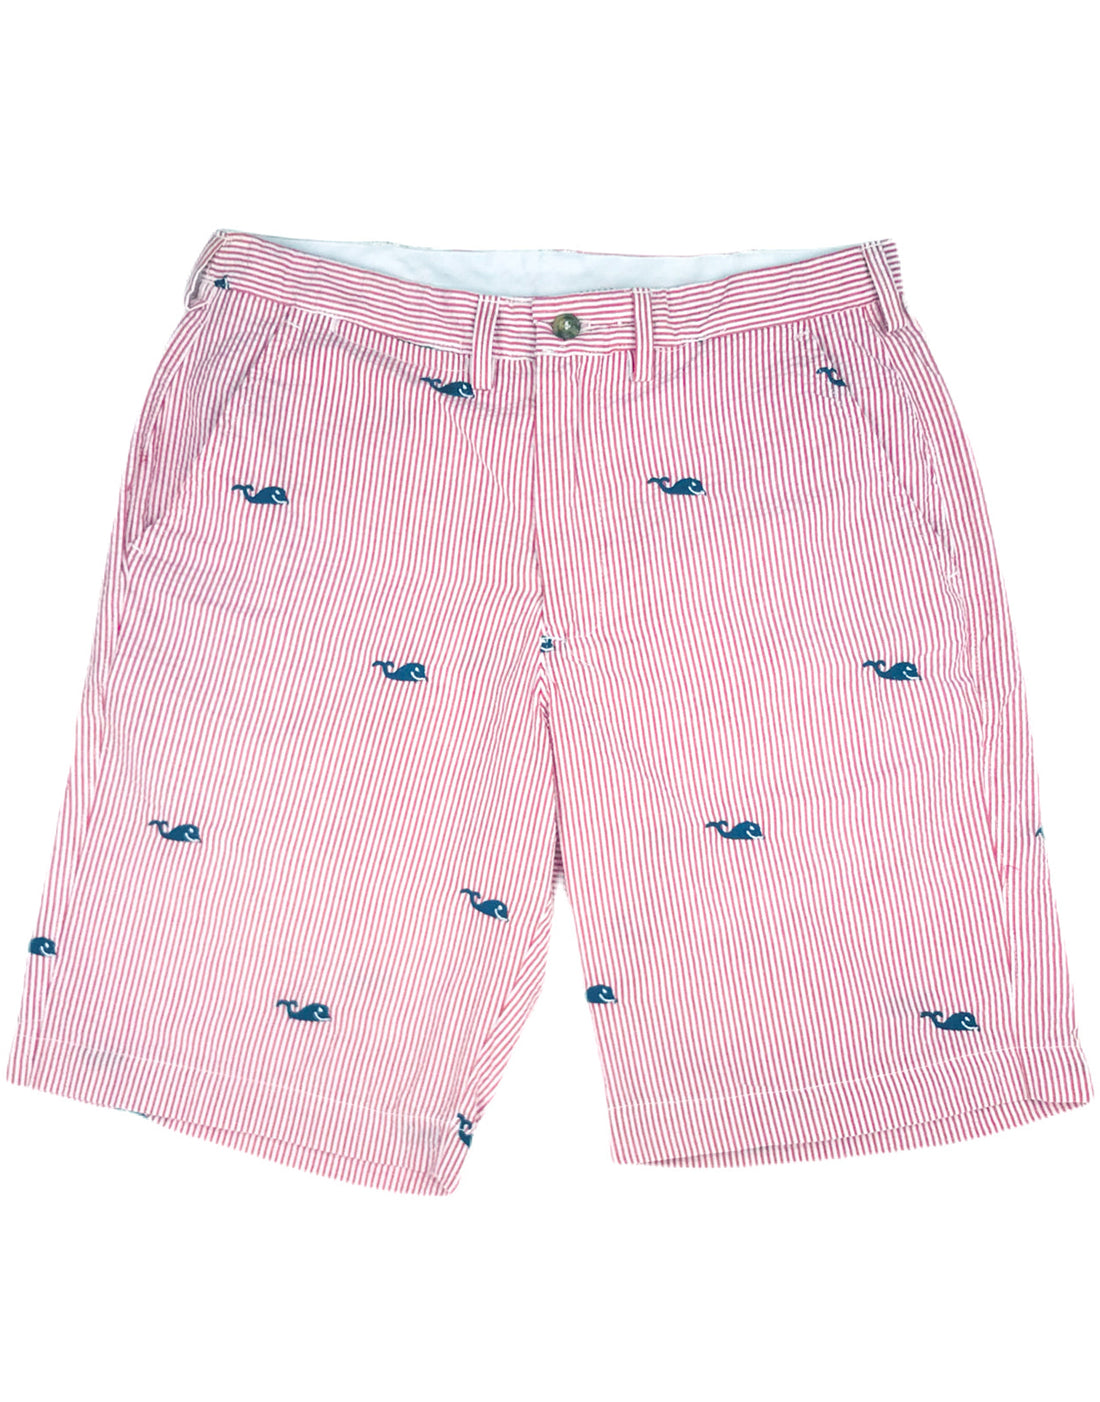 Red Mens Seersucker Shorts with Navy Embroidered Whales – Piping Prints